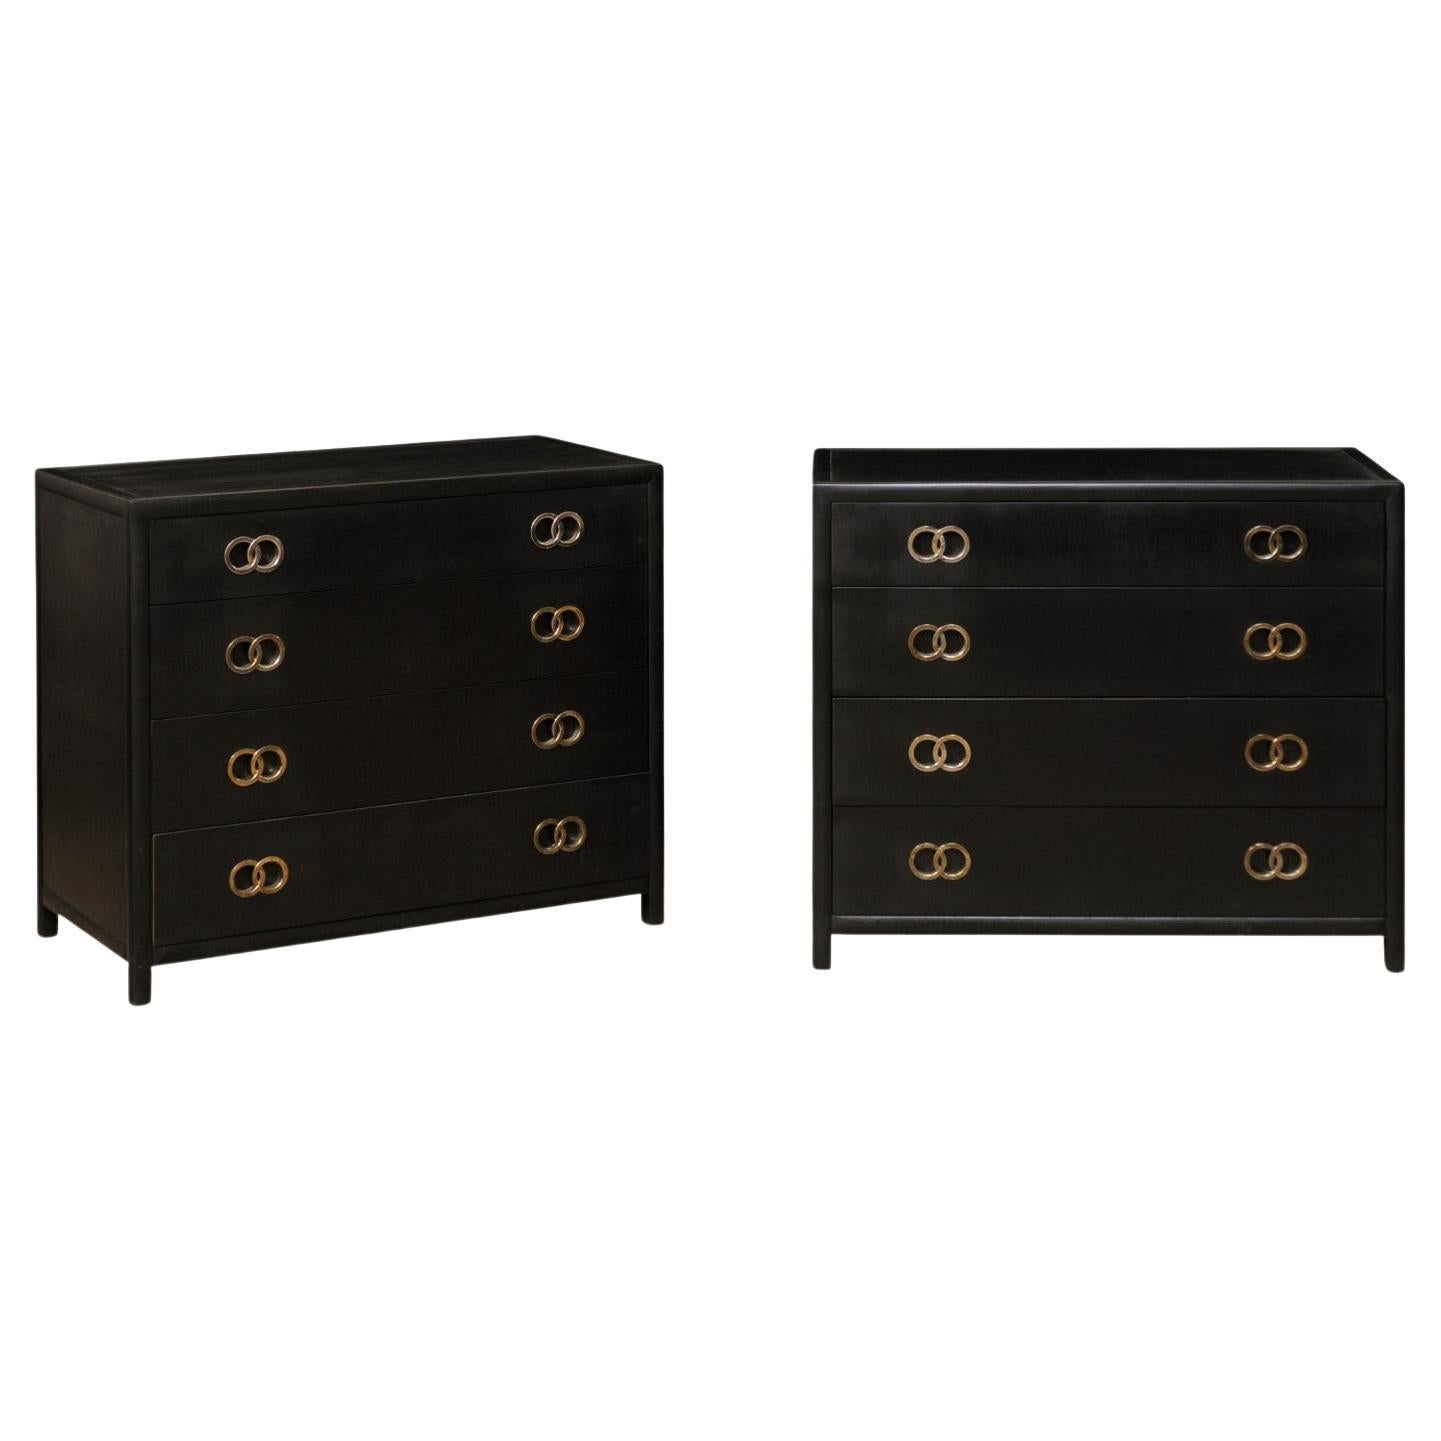 Pair Vintage Chest of Drawers in Black with Silver Hardware, Clean Modern Design For Sale